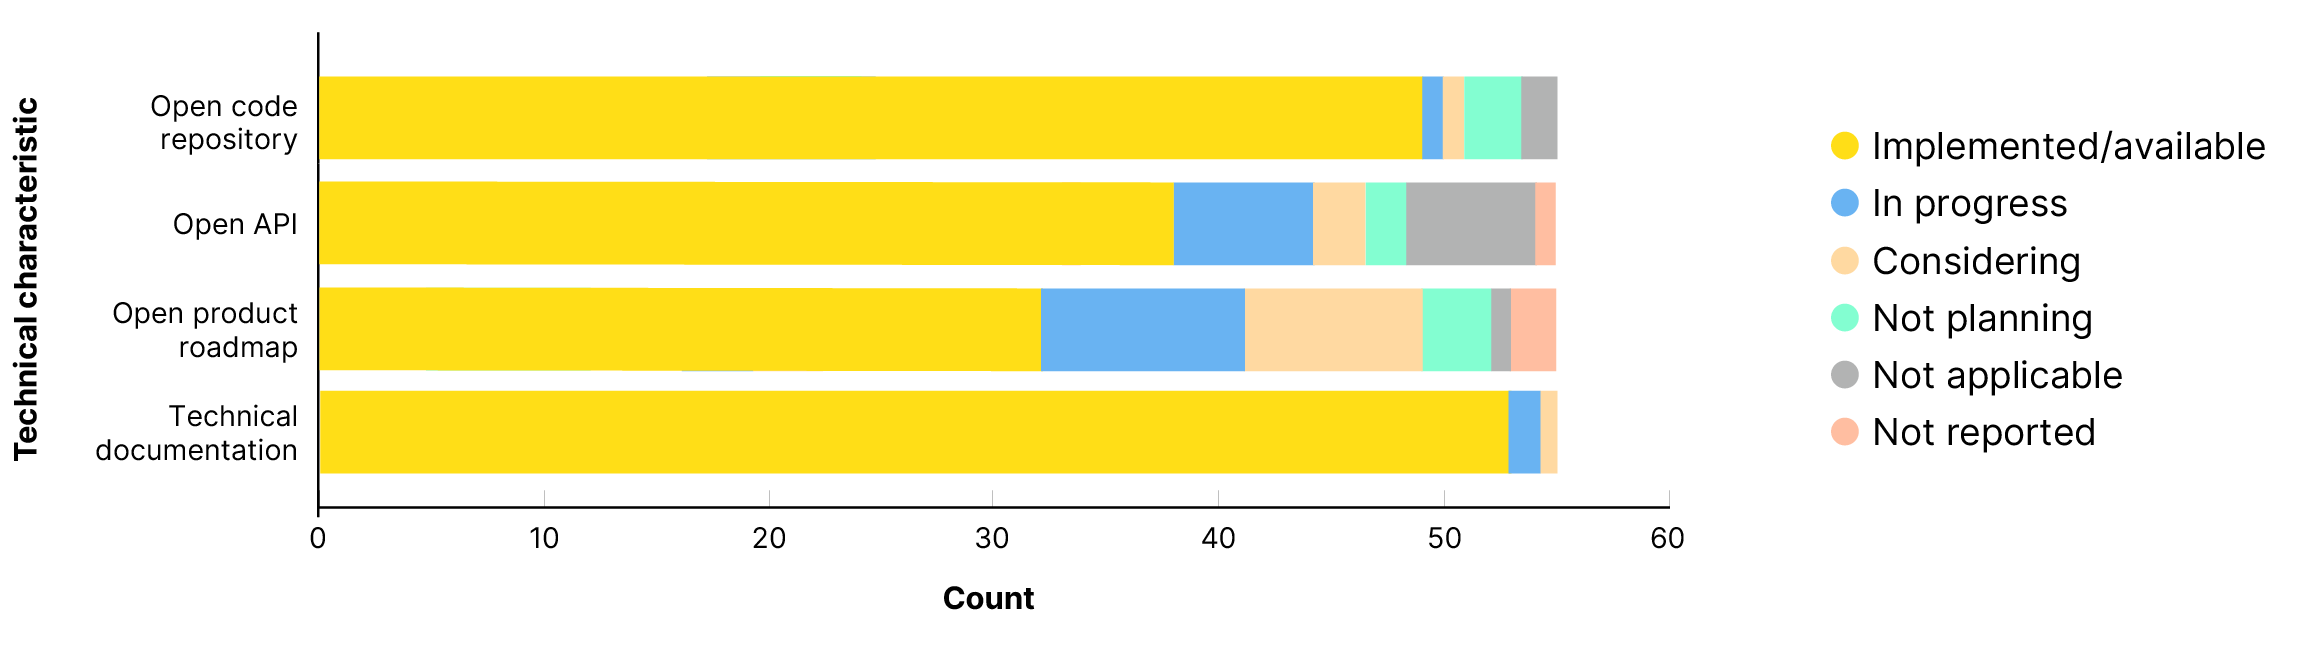 Stacked bar chart of the implementation status of technical characteristics. The vast majority of open infrastructures provide technical documentation, open code repositories, and open API.